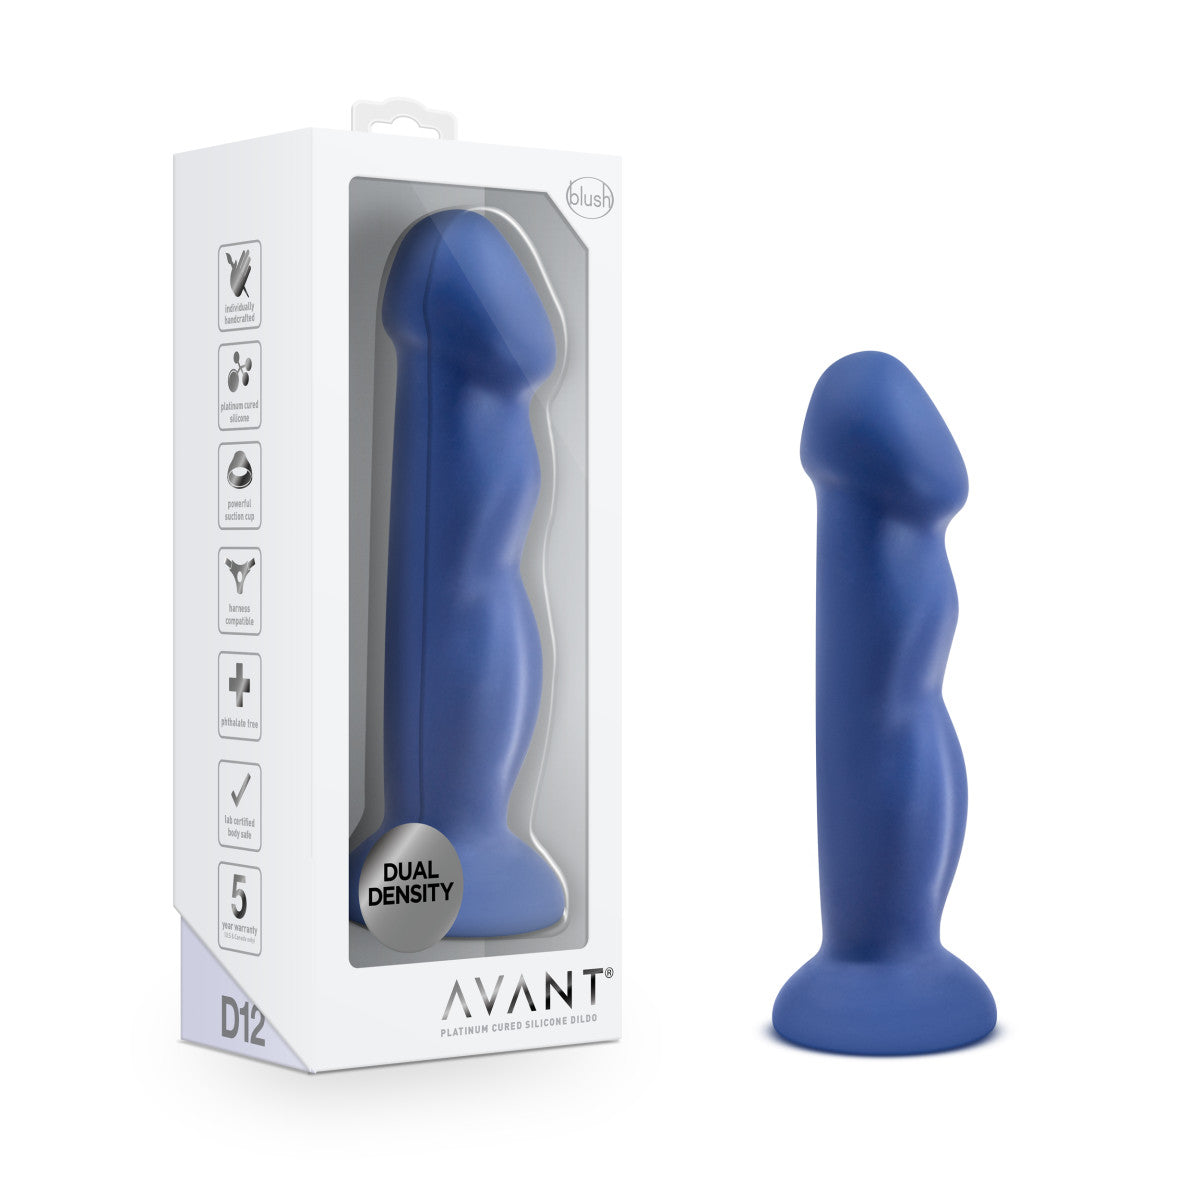 Blush Avant | Suko Indigo D12: Artisan 8 Inch Curved G-Spot Dildo with Suction Cup Base - Elegantly Made with Smooth Ultrasilk® Purio™ Silicone